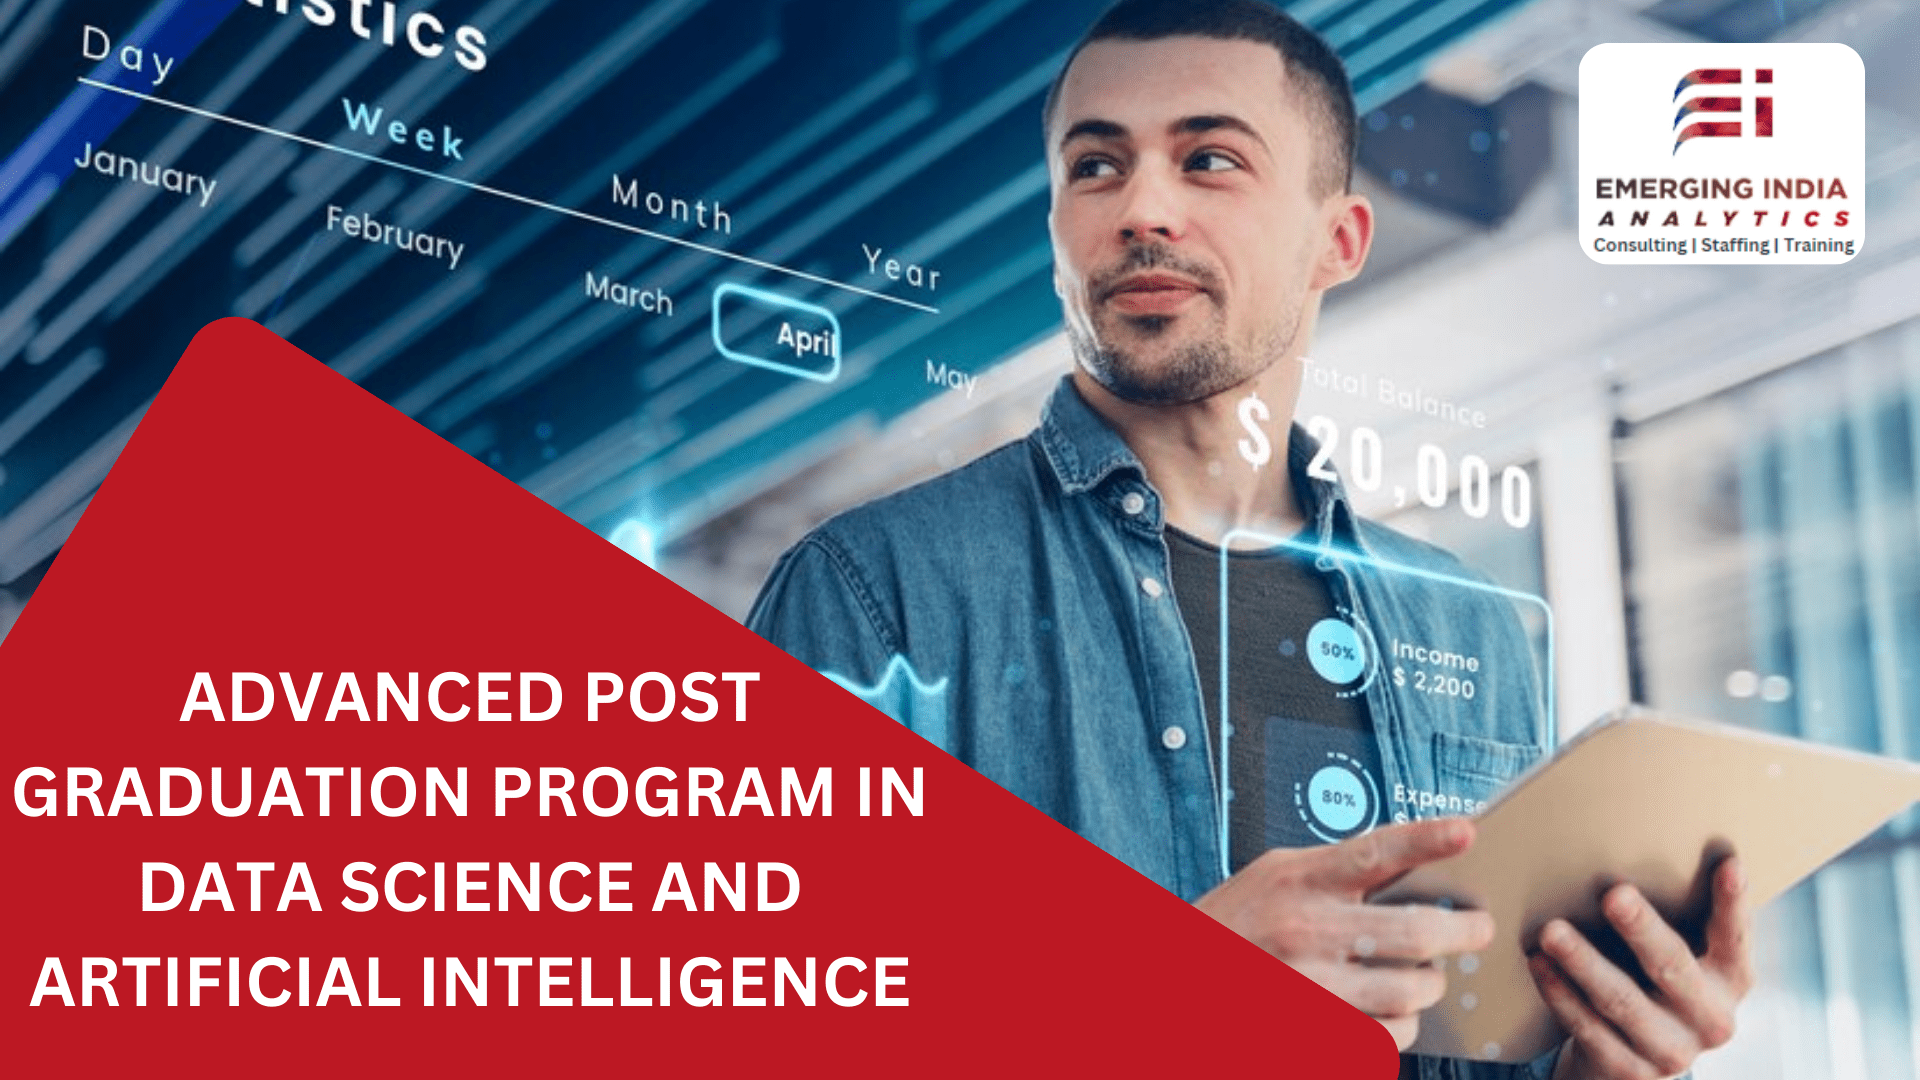 Post Graduation Program in Data Science and Artificial Intelligence